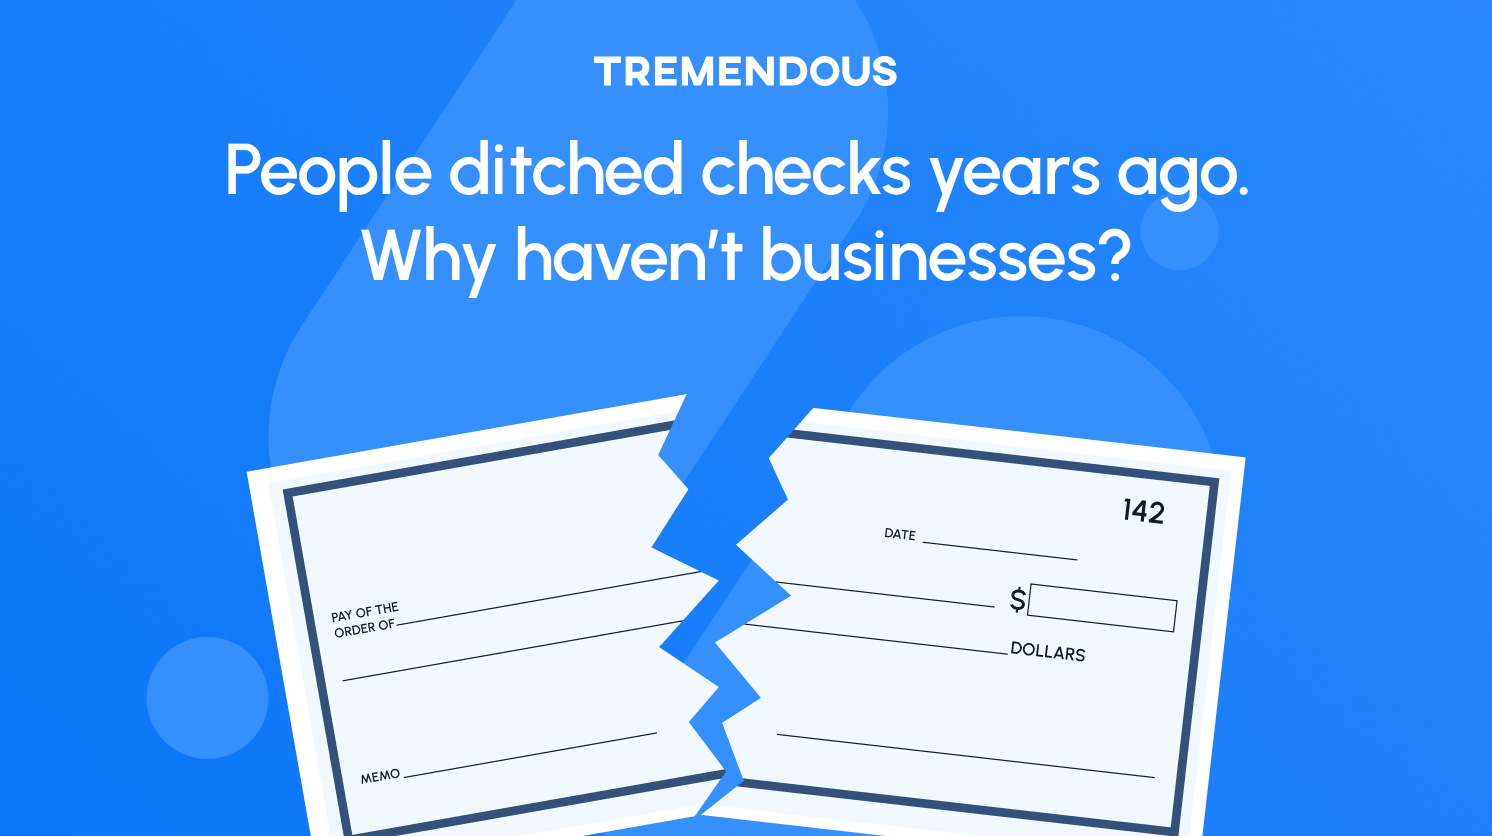 People ditched checks years ago. Why haven’t businesses?